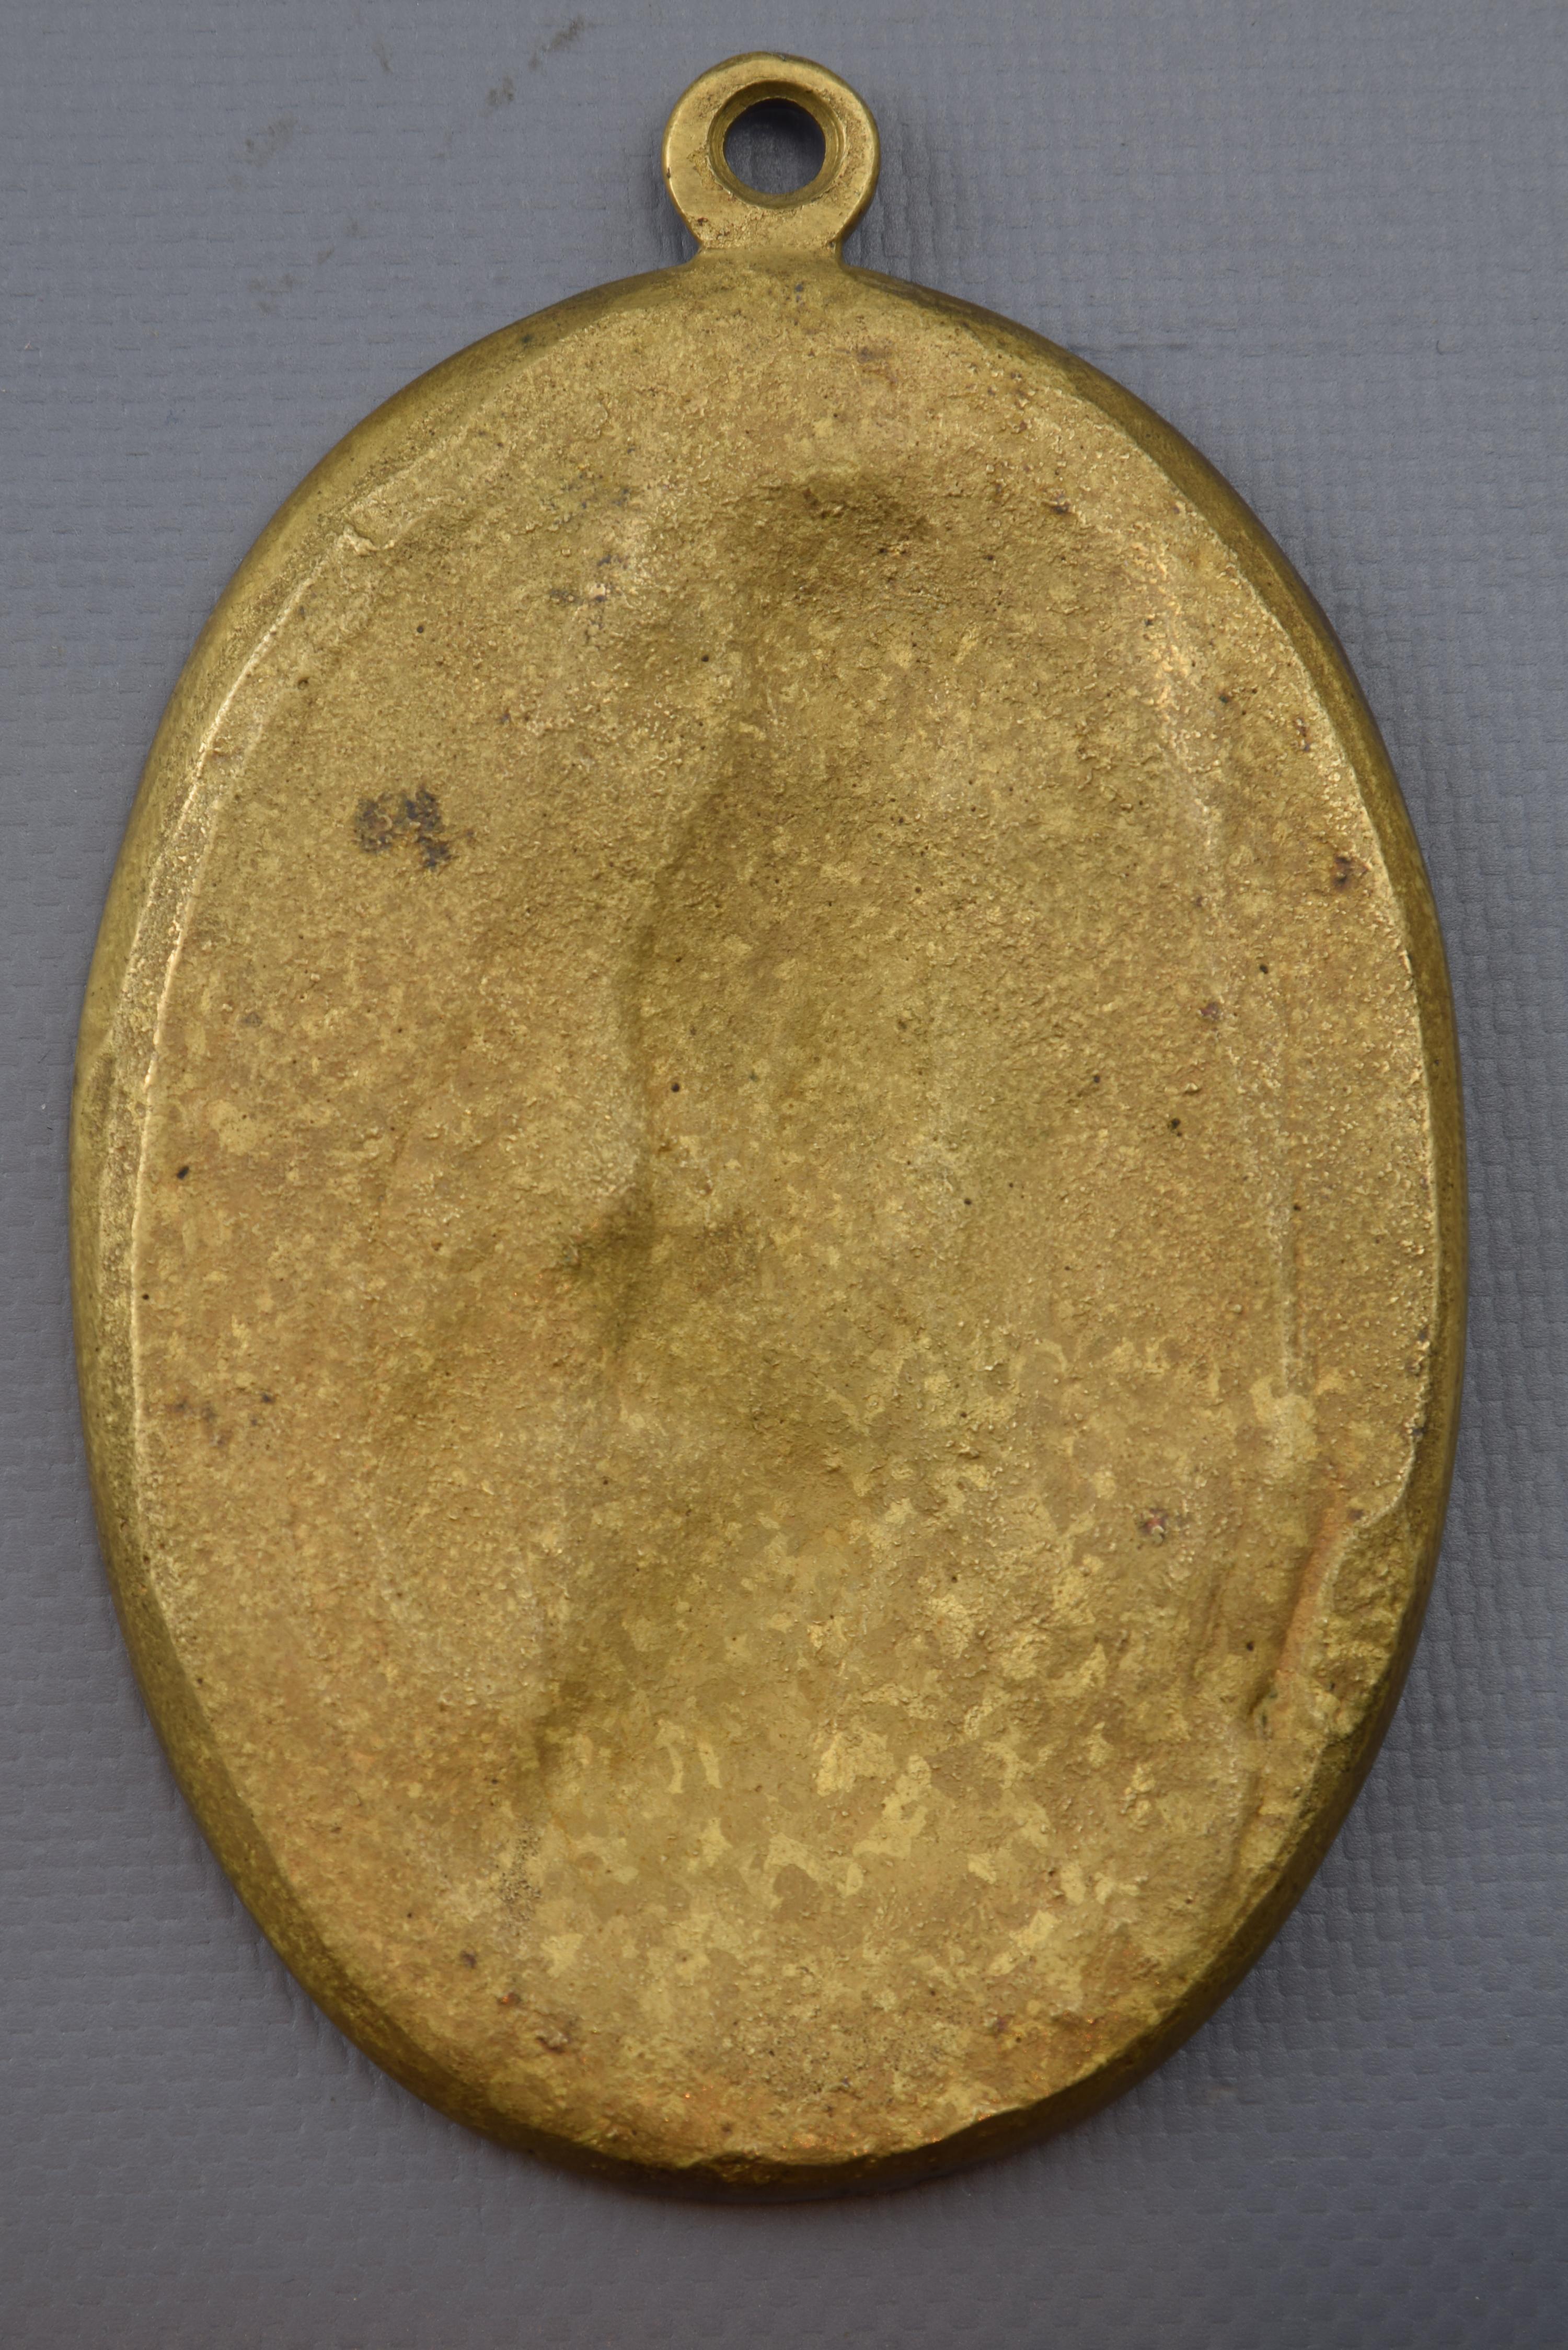 Devotional plaque, San Vicente Mártir, or Huesca or Zaragoza, or Valencia. Bronze, 19th century.
Oval bronze plate with a circular element at the top and a frame to enhance the relief of its interior, which shows a young man, dressed as a priest,